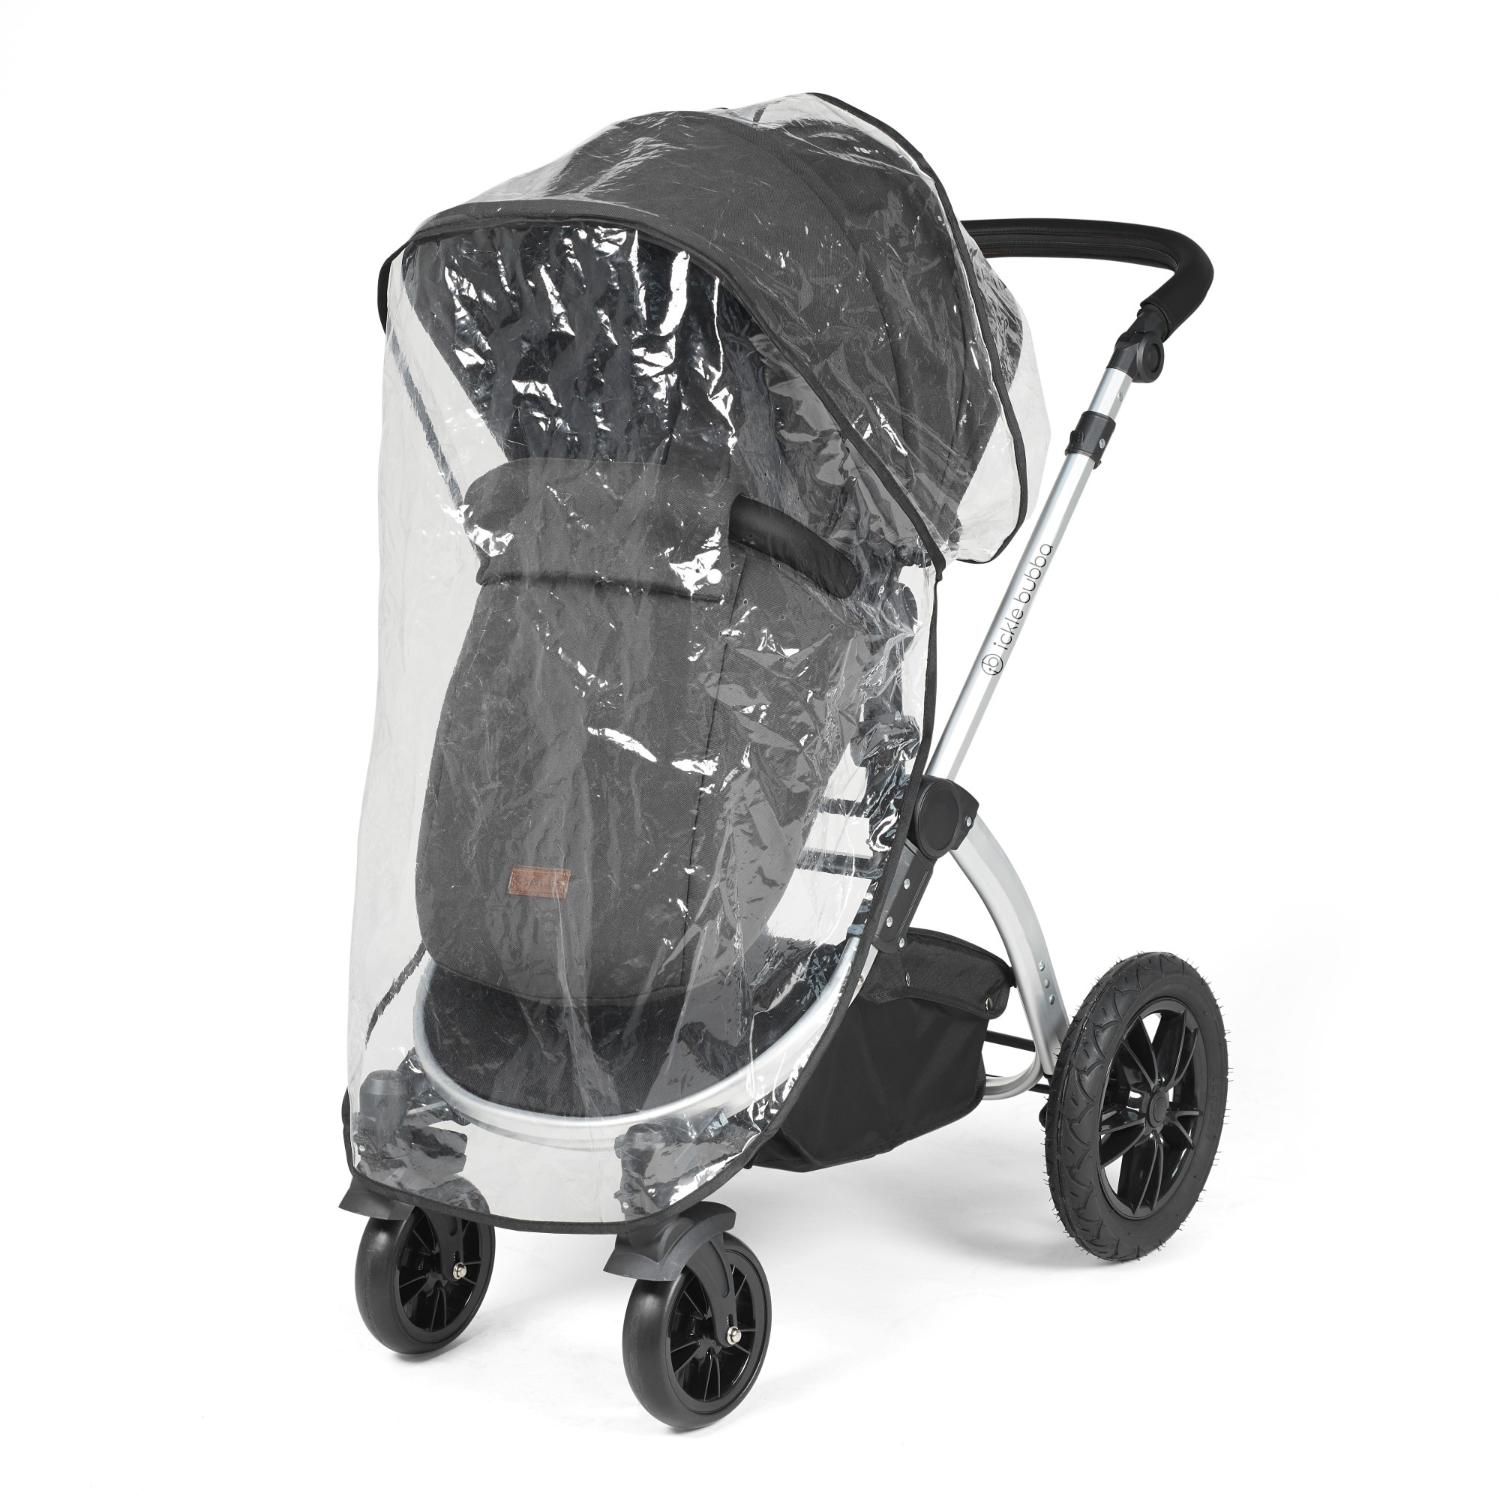 Rain cover placed on an Ickle Bubba Stomp Luxe Pushchair in Charcoal Grey colour with silver chassis